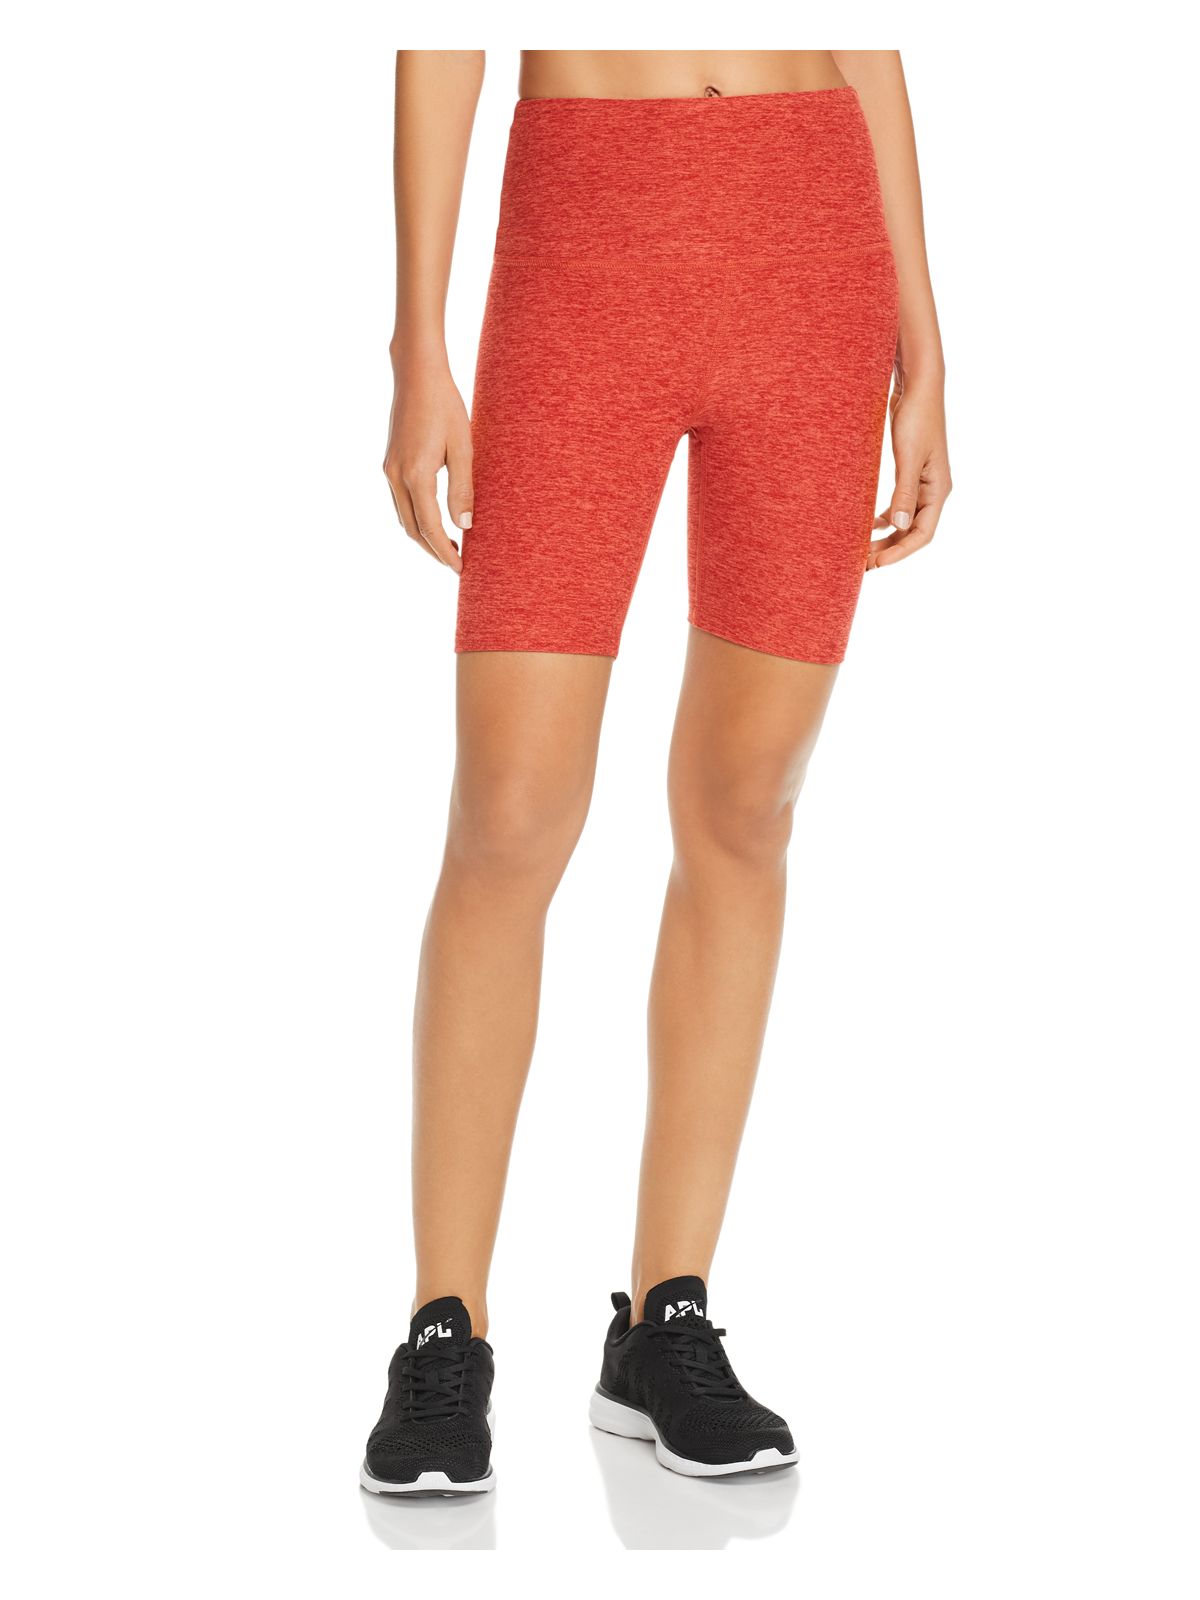 BEYOND YOGA Womens Red Stretch Heather Active Wear High Waist Shorts XS